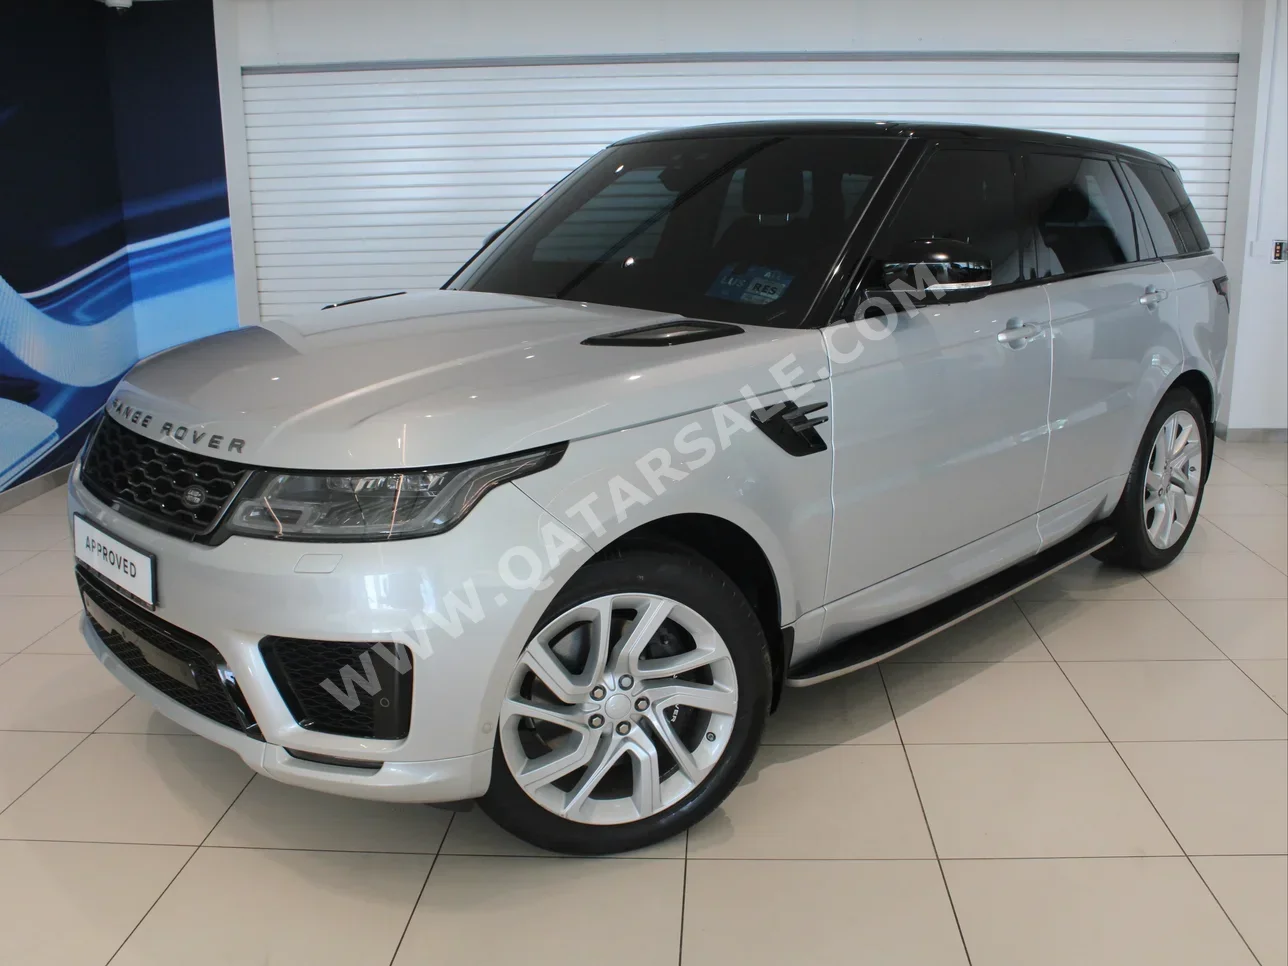 Land Rover  Range Rover  Sport HSE Dynamic  2021  Automatic  74,000 Km  6 Cylinder  All Wheel Drive (AWD)  SUV  Silver  With Warranty